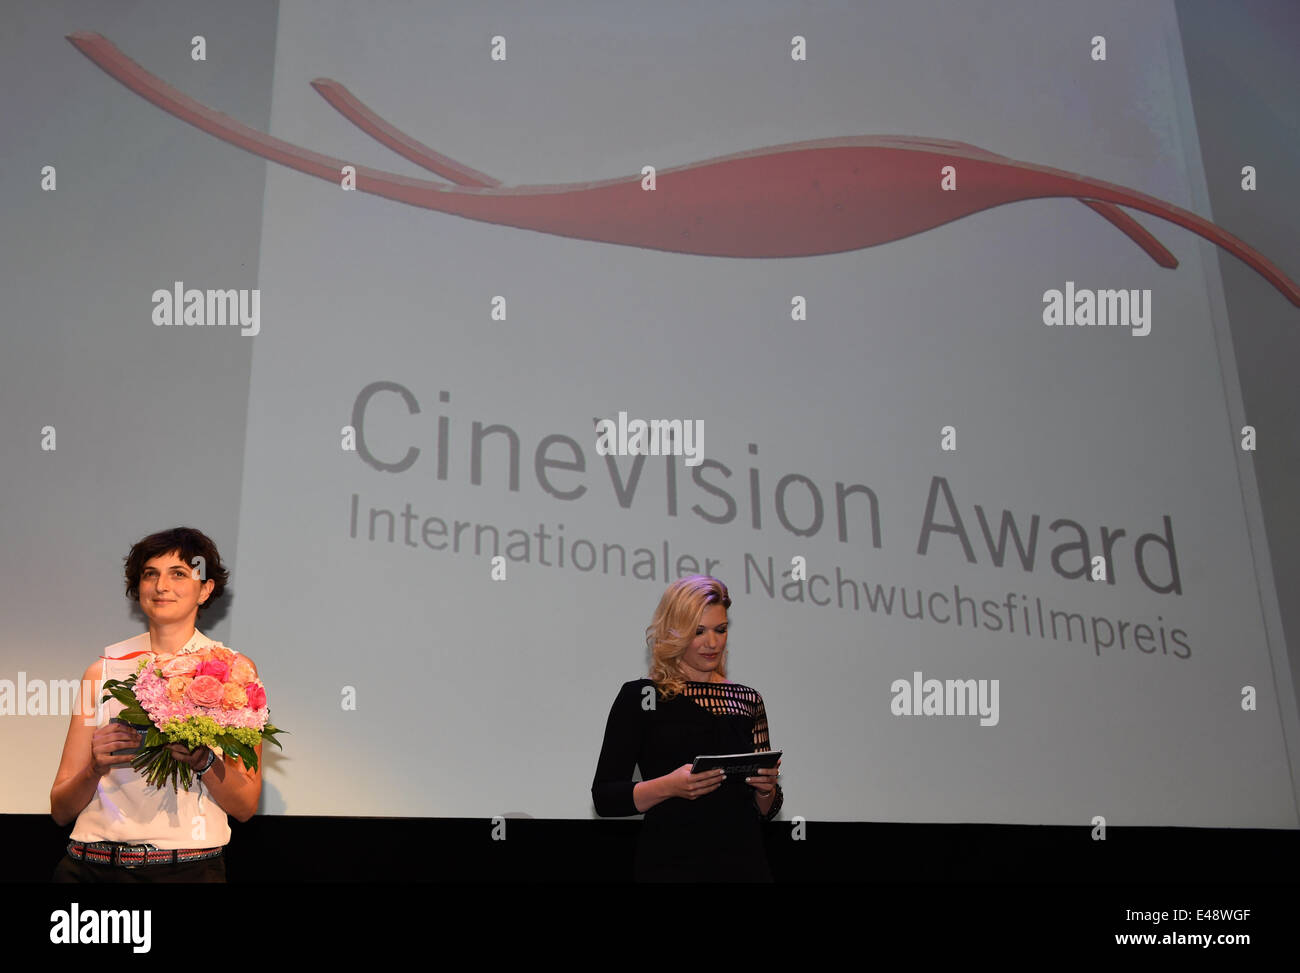 Munich, Germany. 5th July, 2014. Winner of the CineVision Awards Italian directress Alice Rohrwacher (L) at the final event of the Munich international film festival in Munich, Germany, 5 July 2014. Hostess Jessica Kastrop stands next to her. Photo: Felix Hoerhager/dpa/Alamy Live News Stock Photo